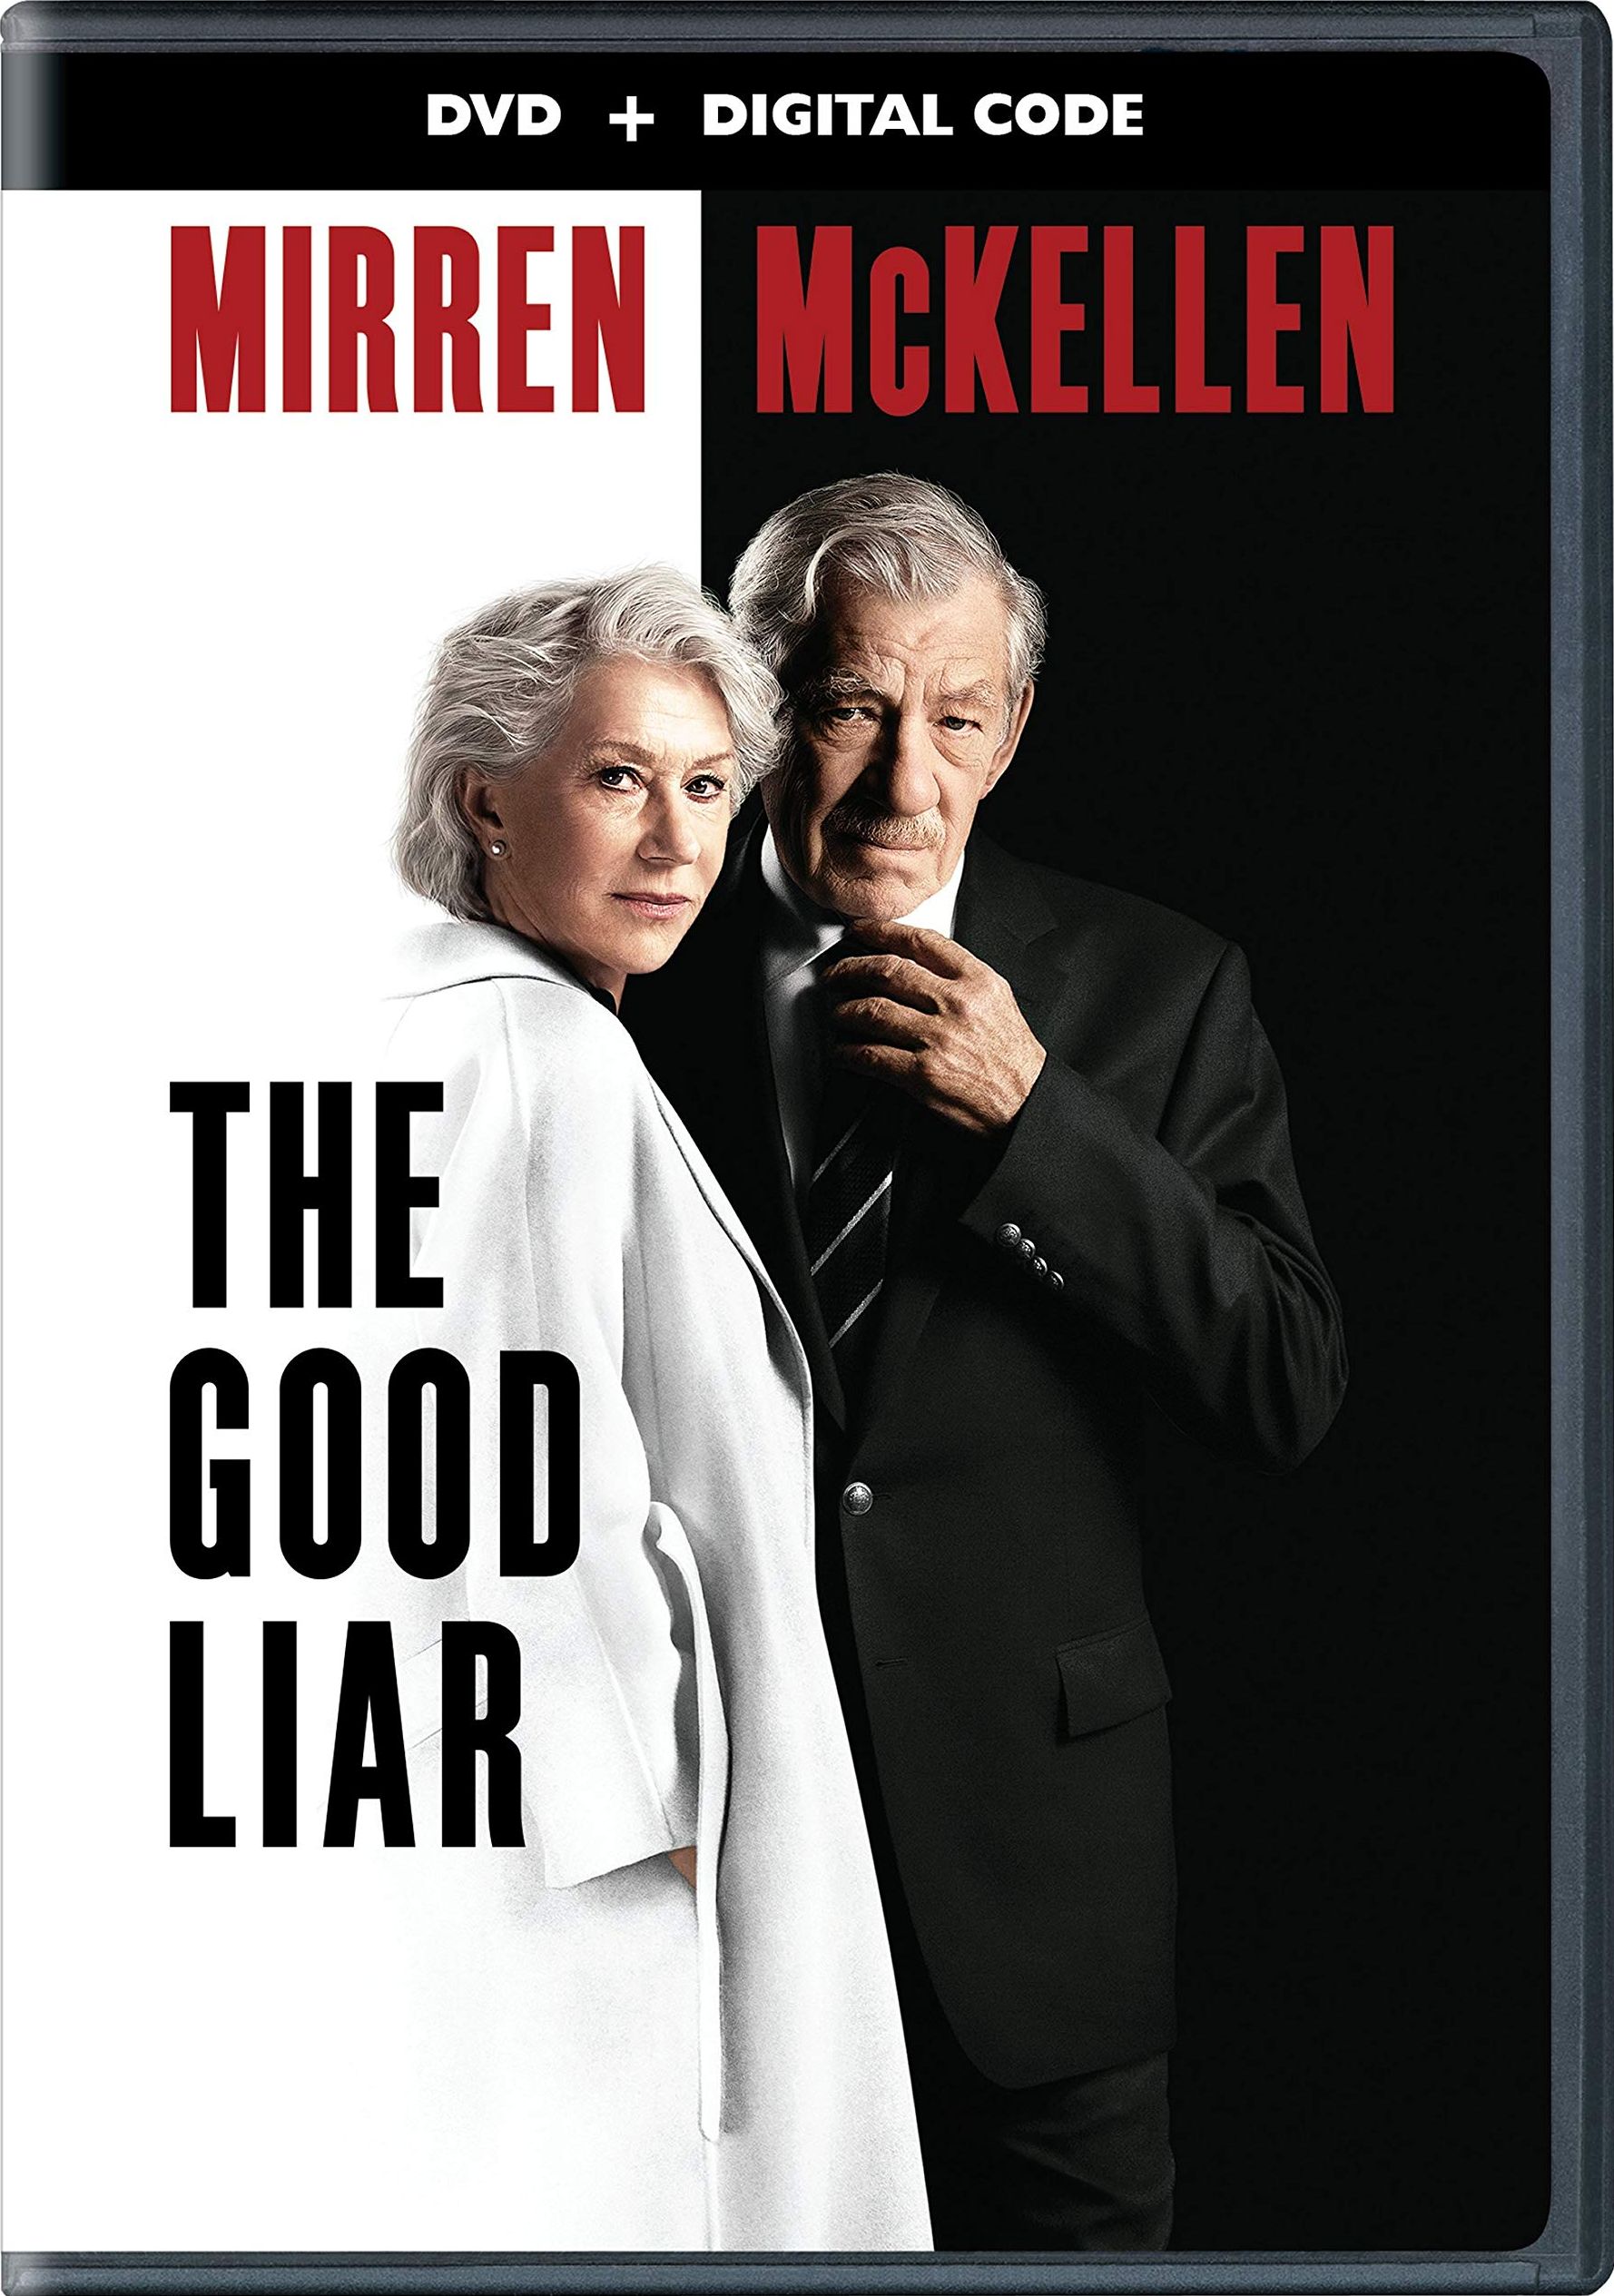 The Good Liar Dvd Release Date February 4 2020